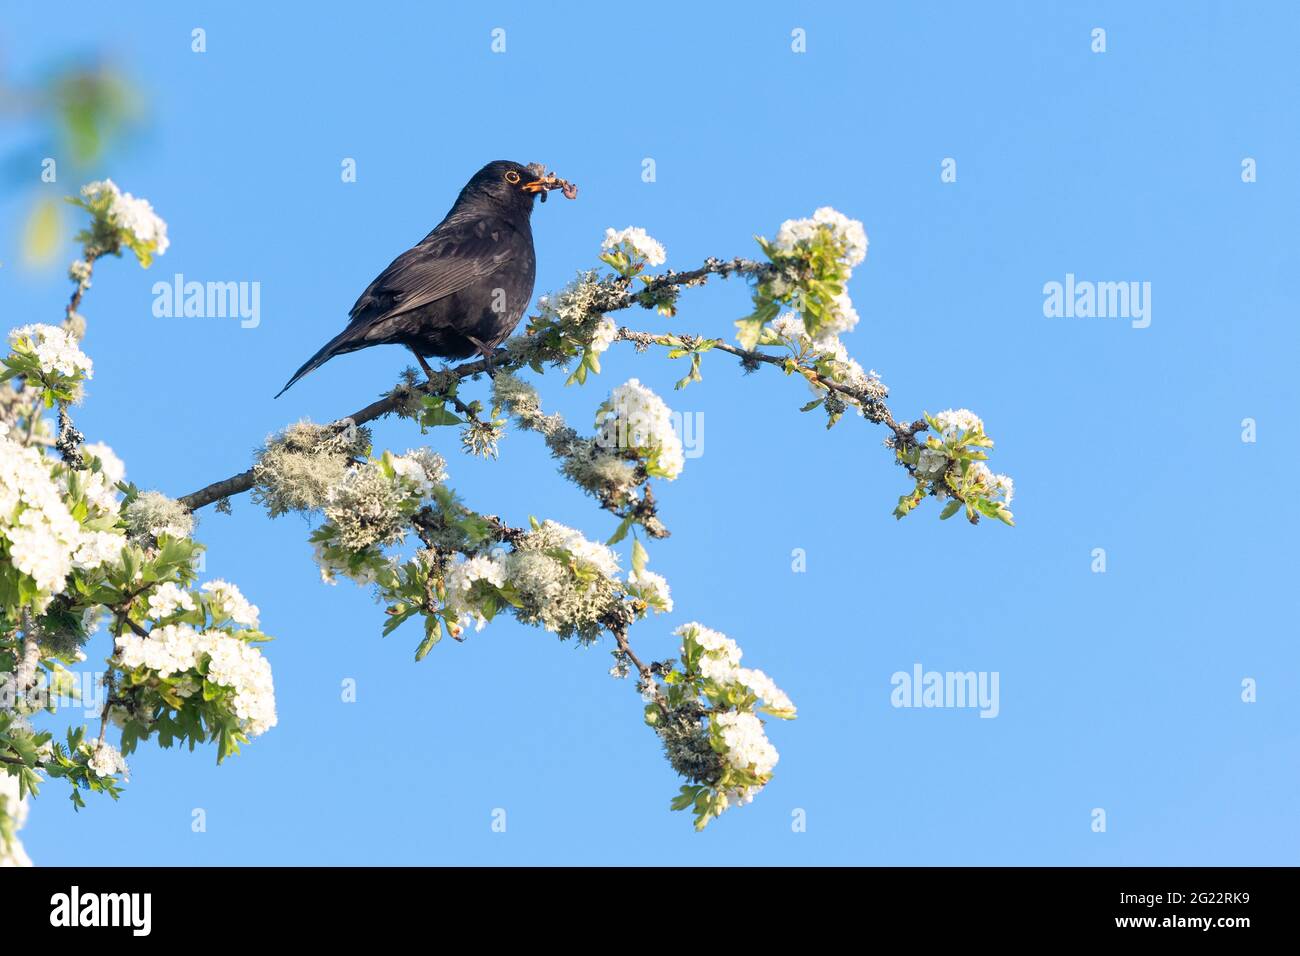 Male blackbird (turdus merula) in spring perched on top of hawthorn tree with beak full of worms grubs and insects for young - Scotland, UK Stock Photo